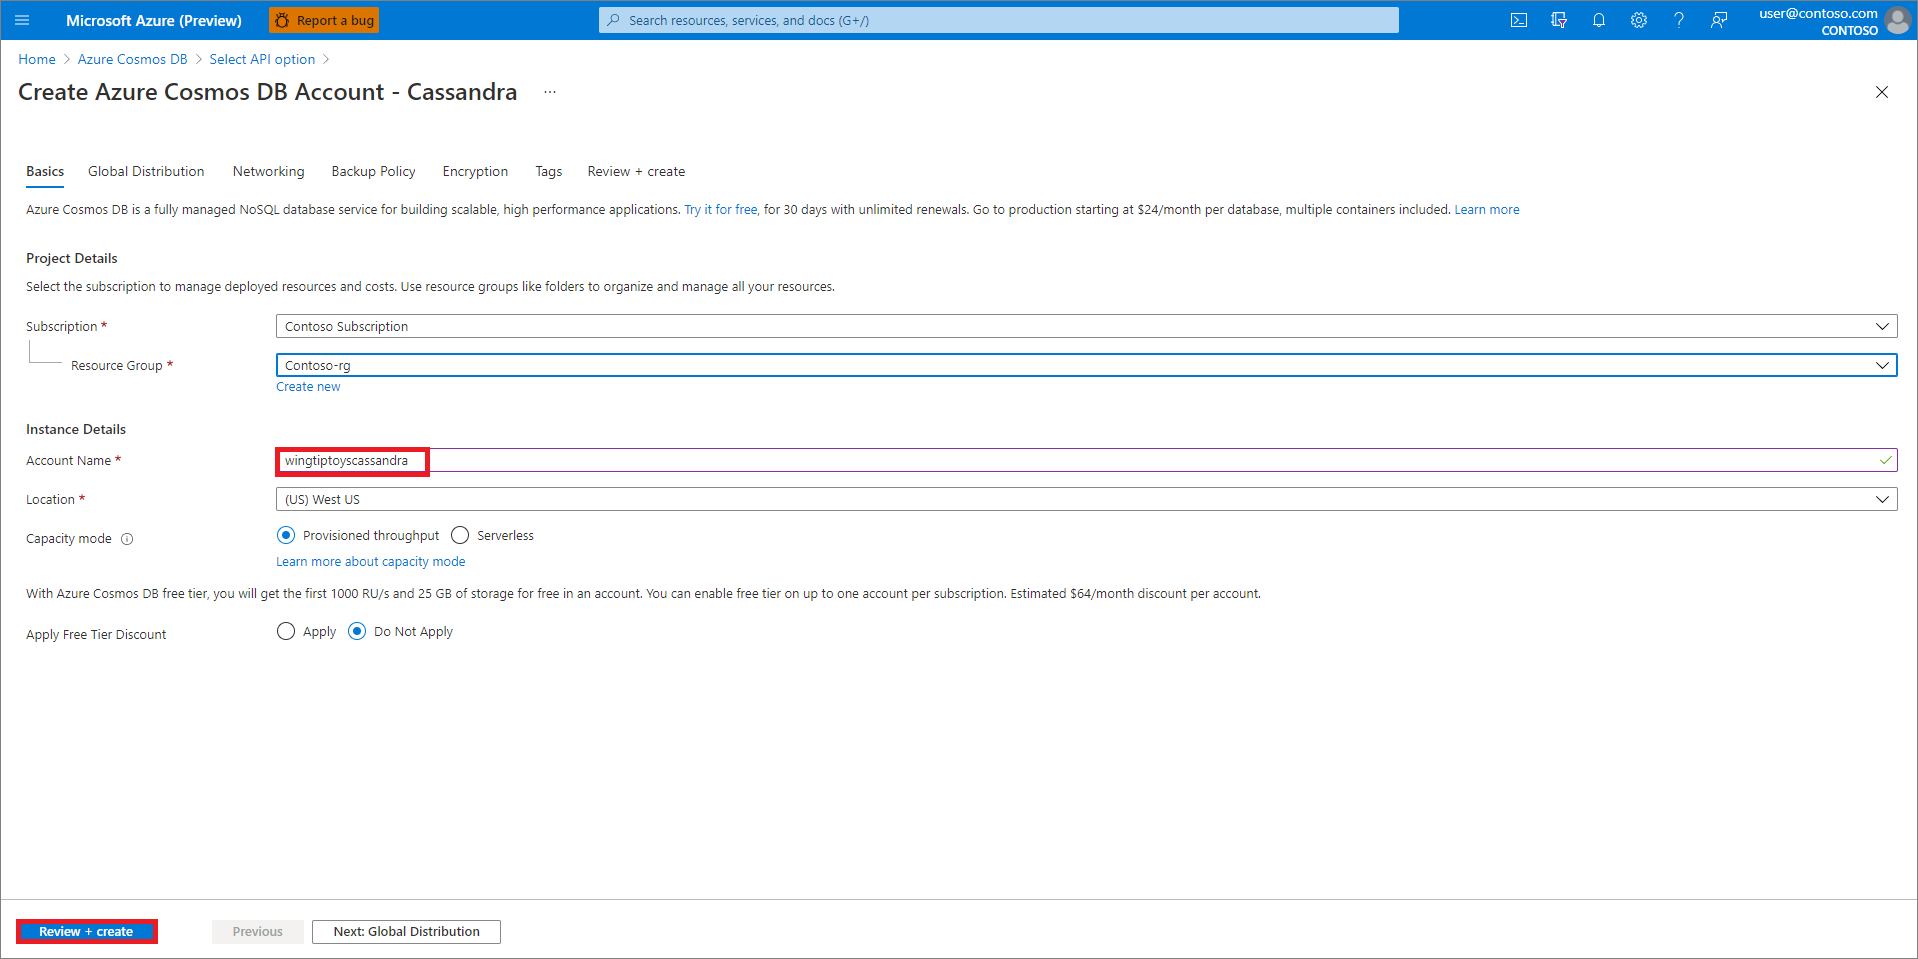 Specify your Azure Cosmos DB account settings.